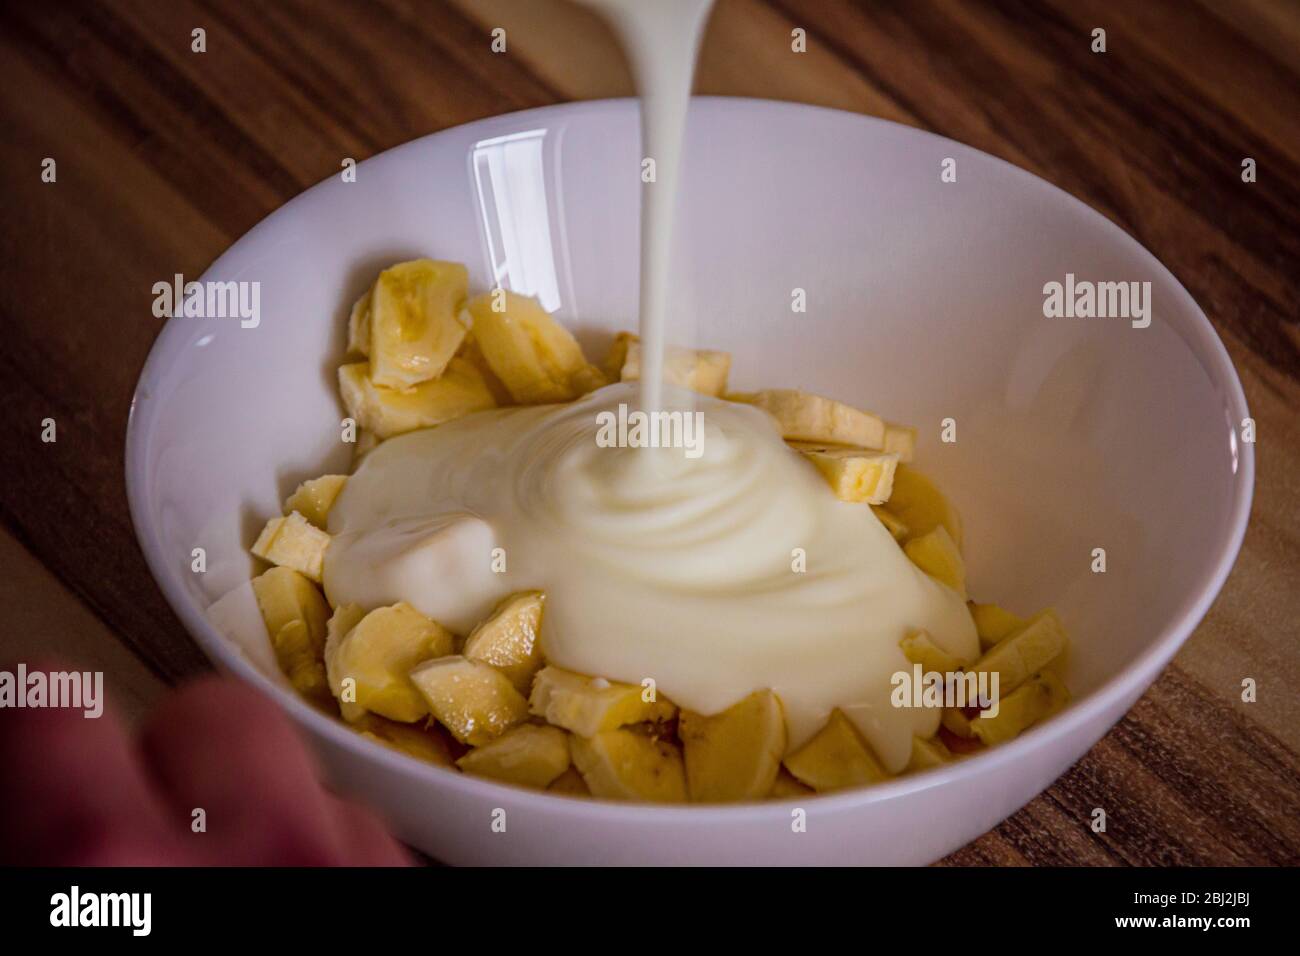 pouring natural yogurt on banana pieces in a white round bowl Stock Photo